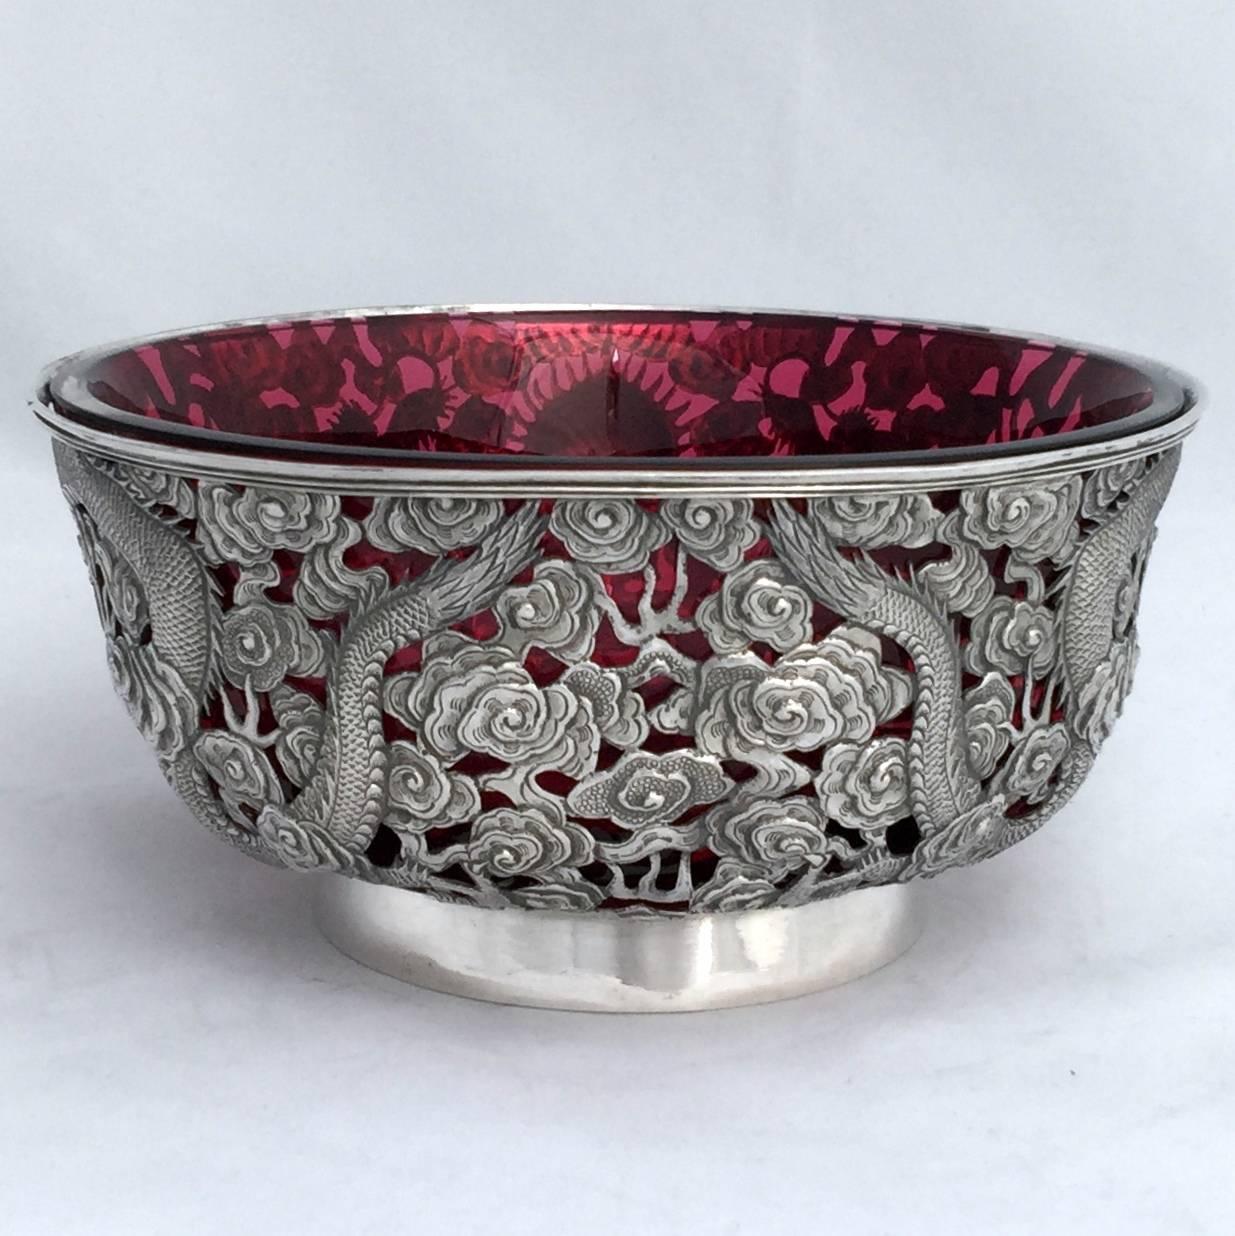 A finely worked Chinese export silver (CES) flared presentation bowl. The pierced and repousse worked body has two four clawed dragons cavorting in the clouds. They chase the magic pearl which forms a reserve for engraving. The repoussed work is